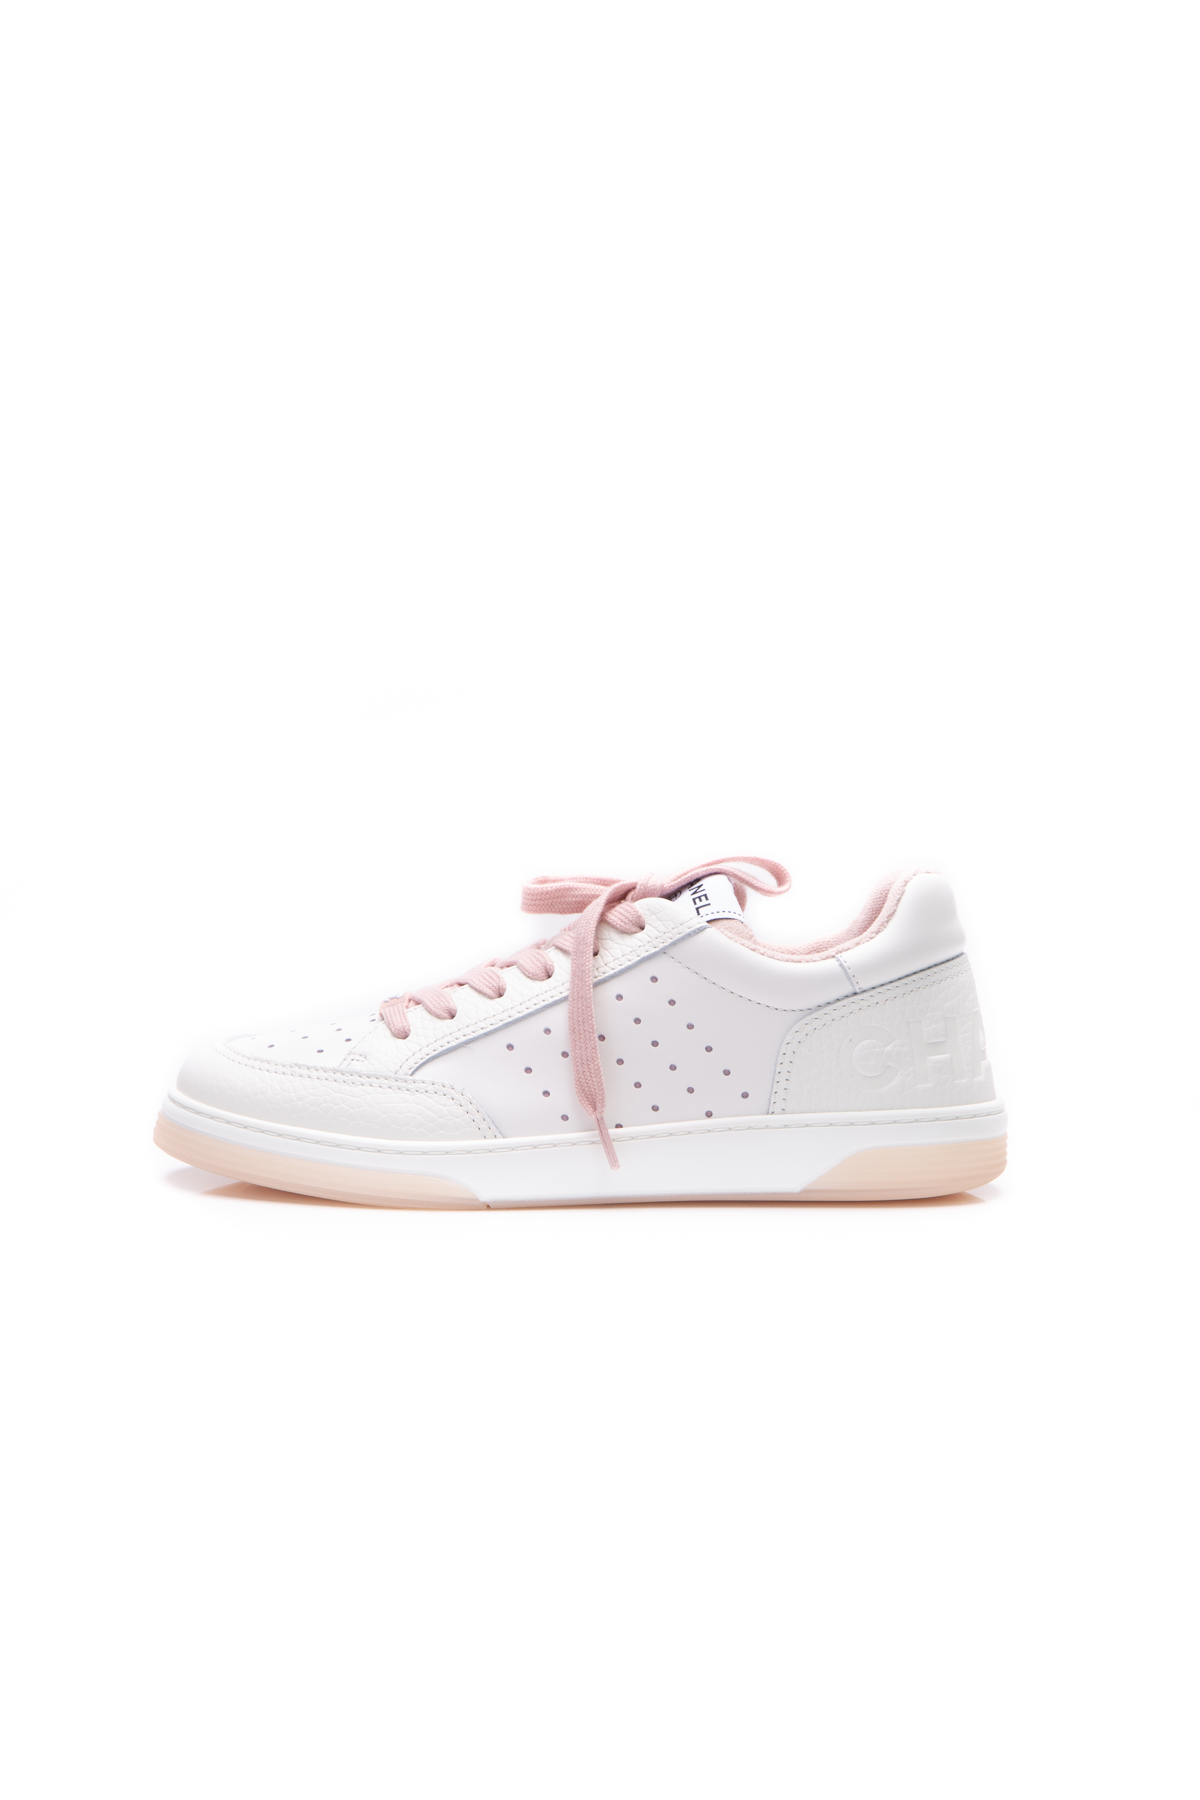 Louis Vuitton Ladies Pink Trainers Sneakers Shoes size 37.5 UK 4.5 Genuine